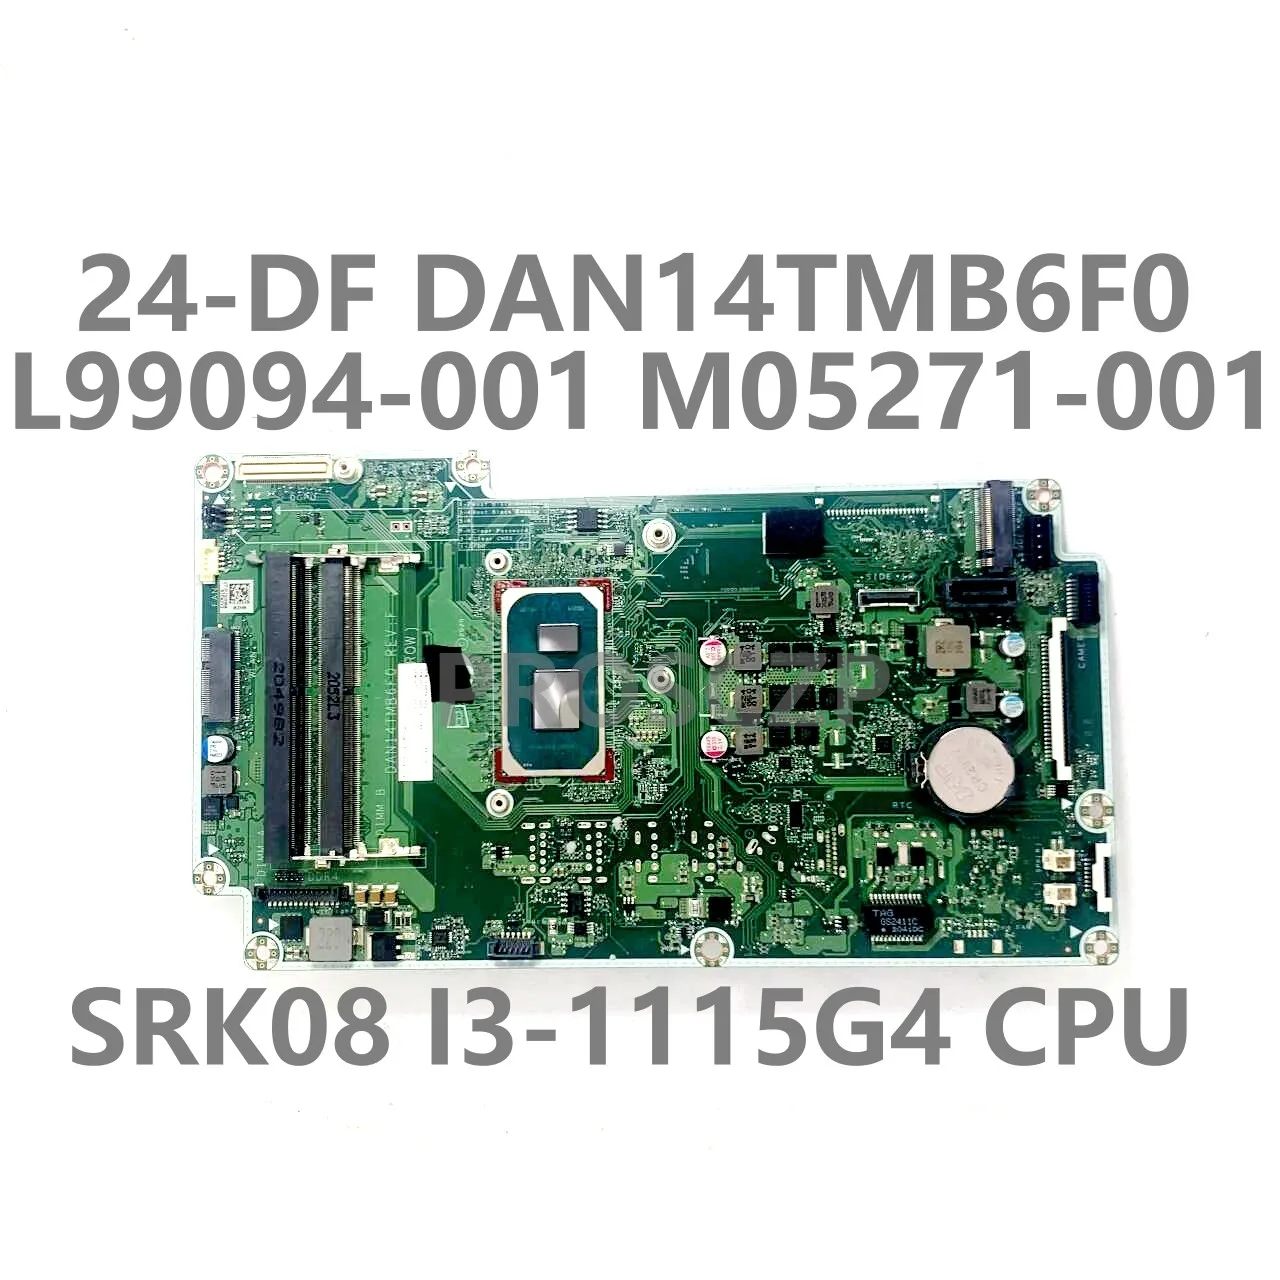 

For HP 24-DF 27-DP L99094-001 M05271-001 M05271-601 Laptop Motherboard DAN14TMB6F0 With SRK08 I3-1115G4 CPU 100%Full Tested Good